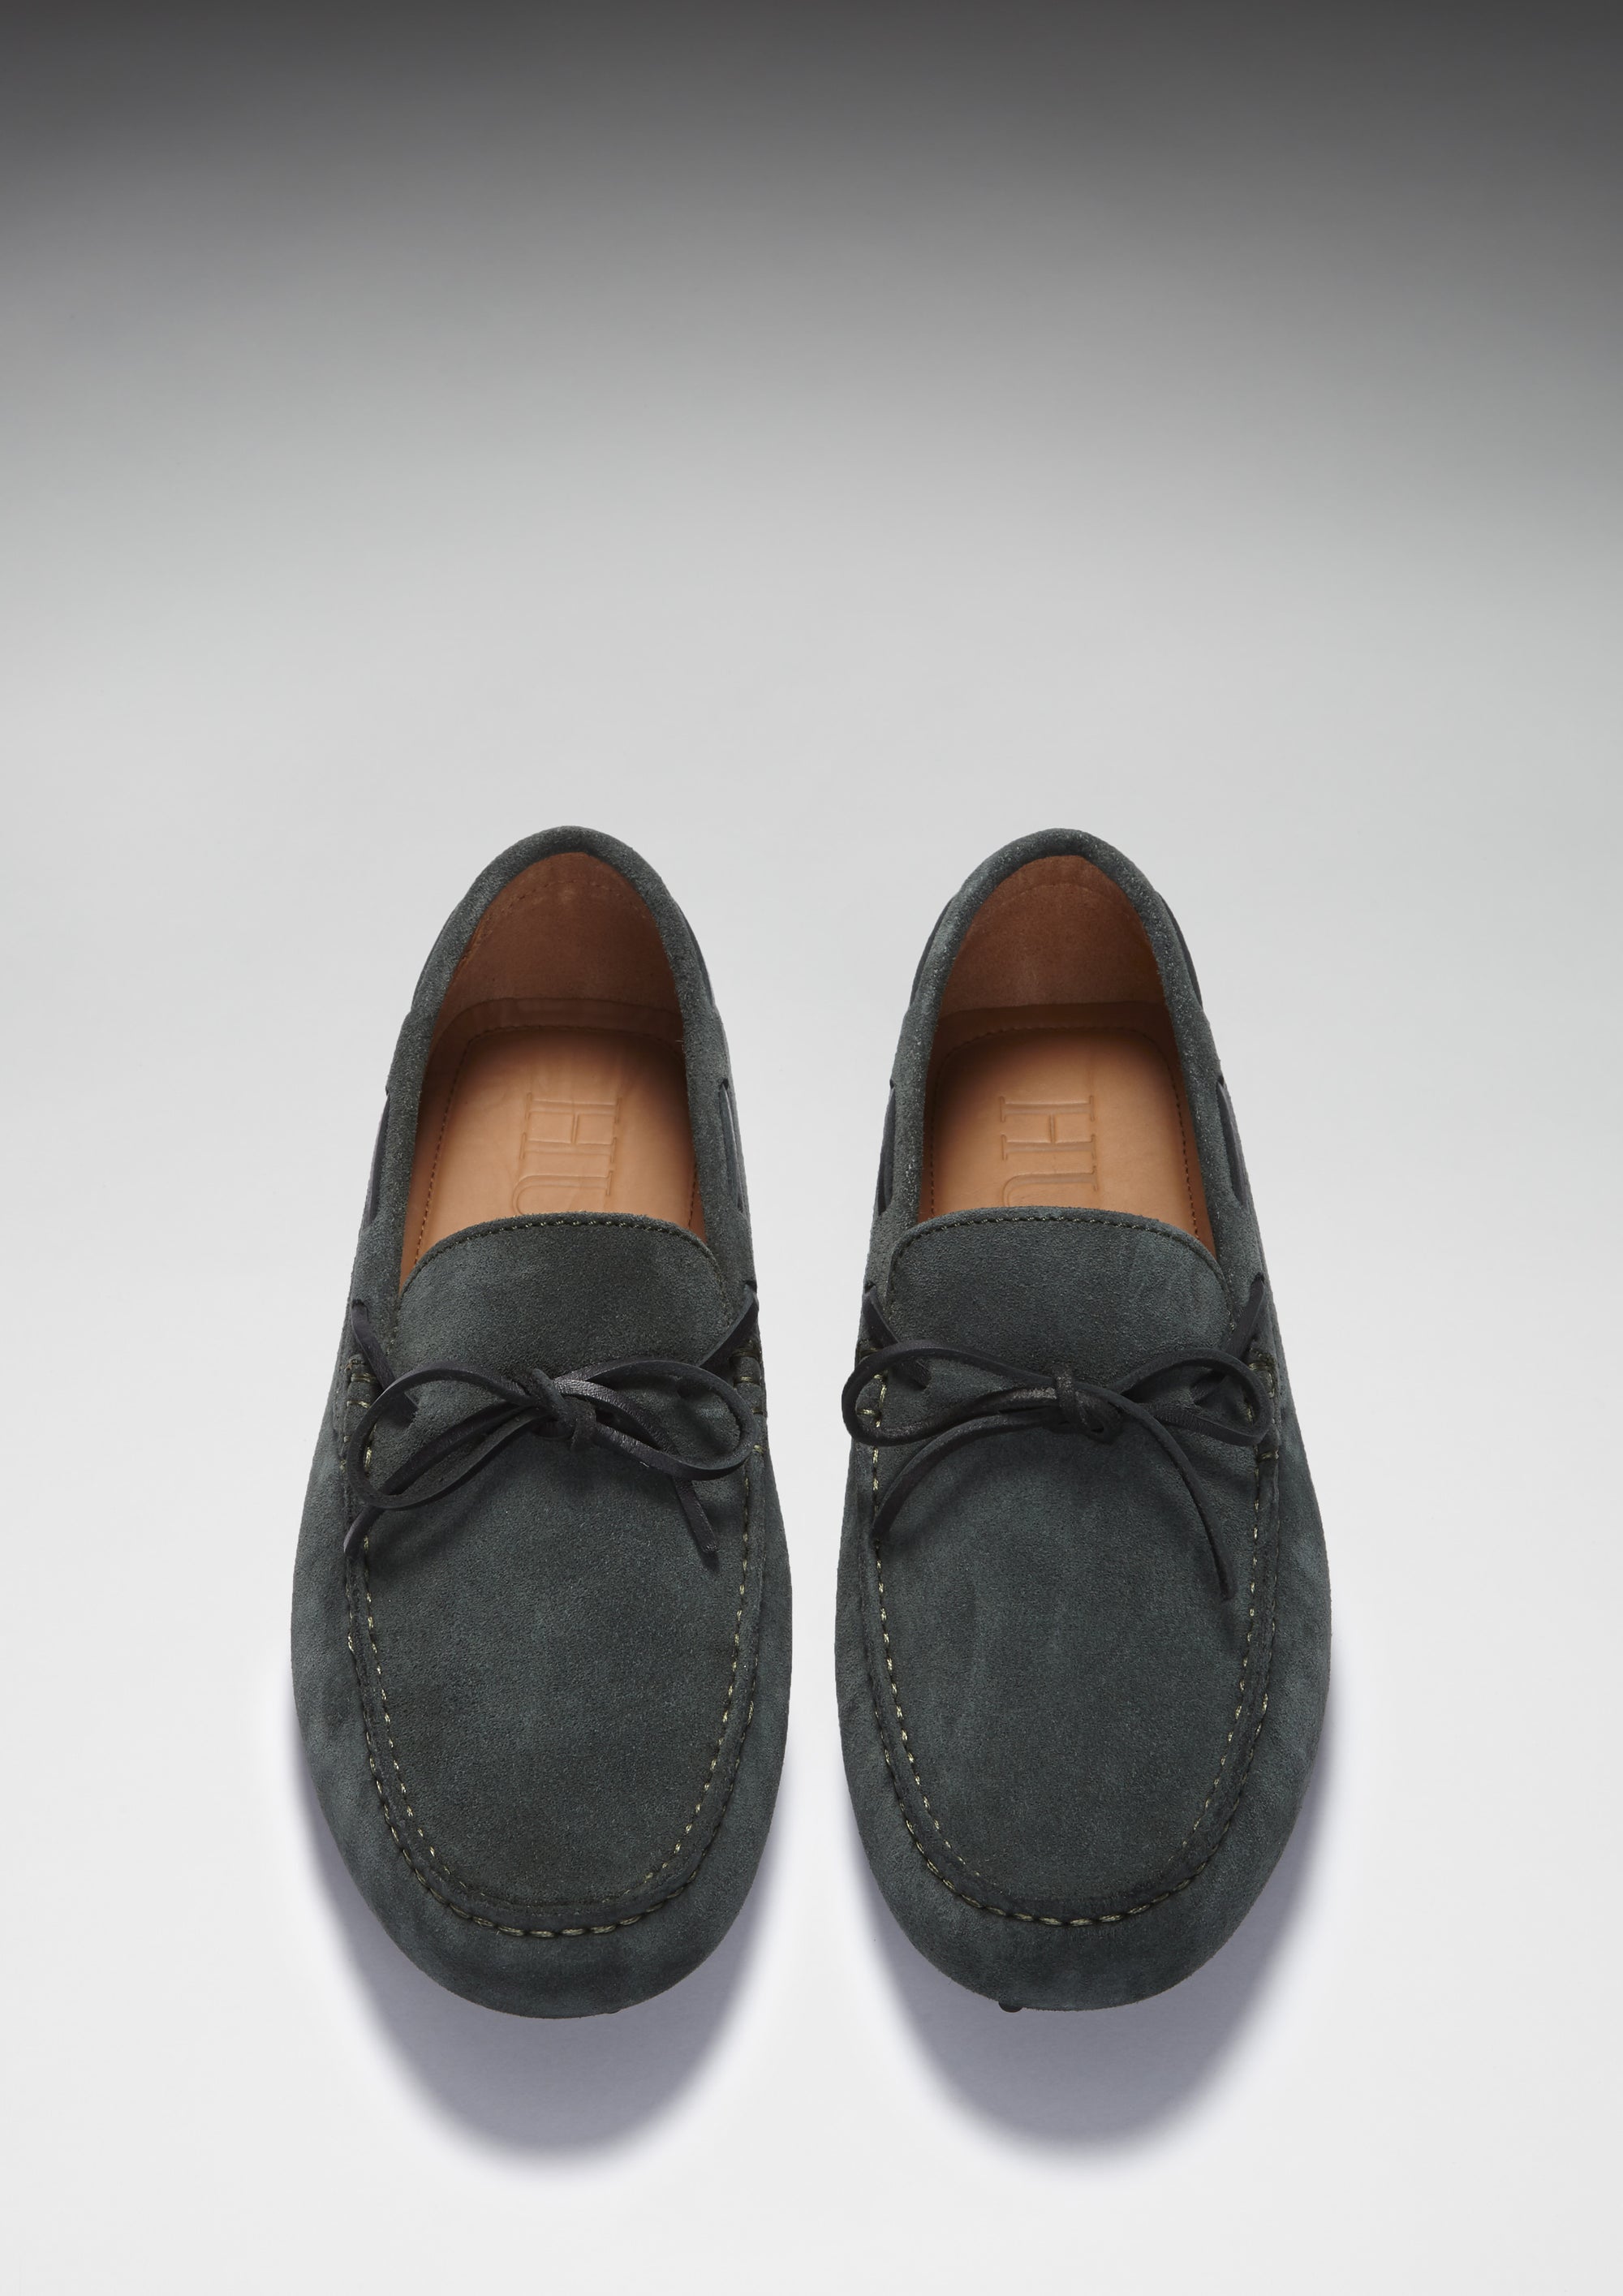 Laced Driving Loafers, racing green suede